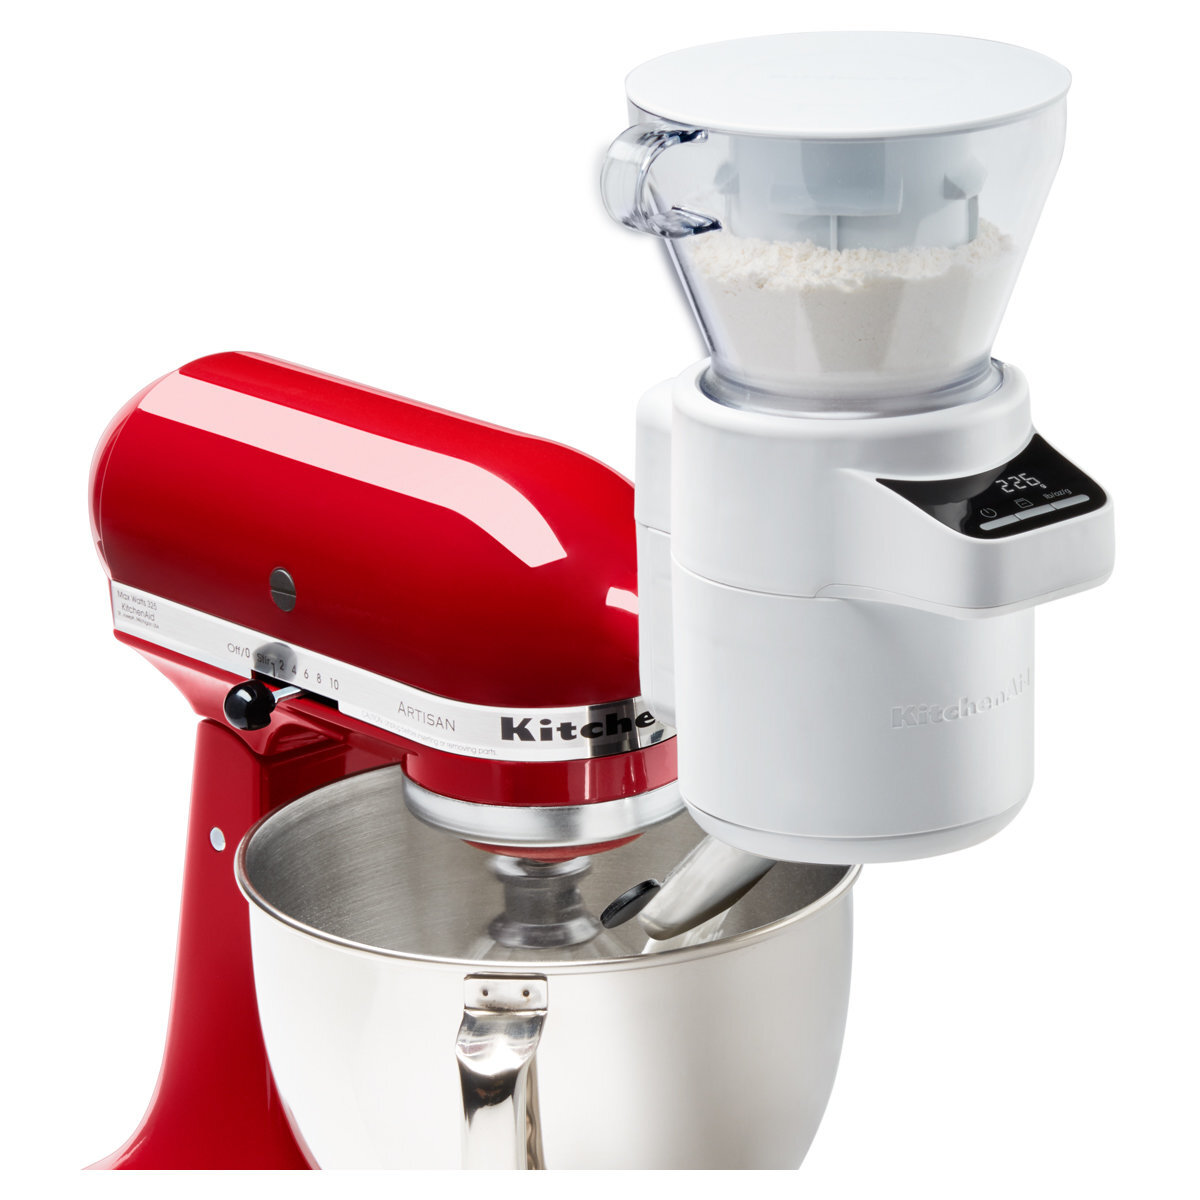 Stand mixer sifter and scale attachment 5KSMSFTA, KitchenAid 